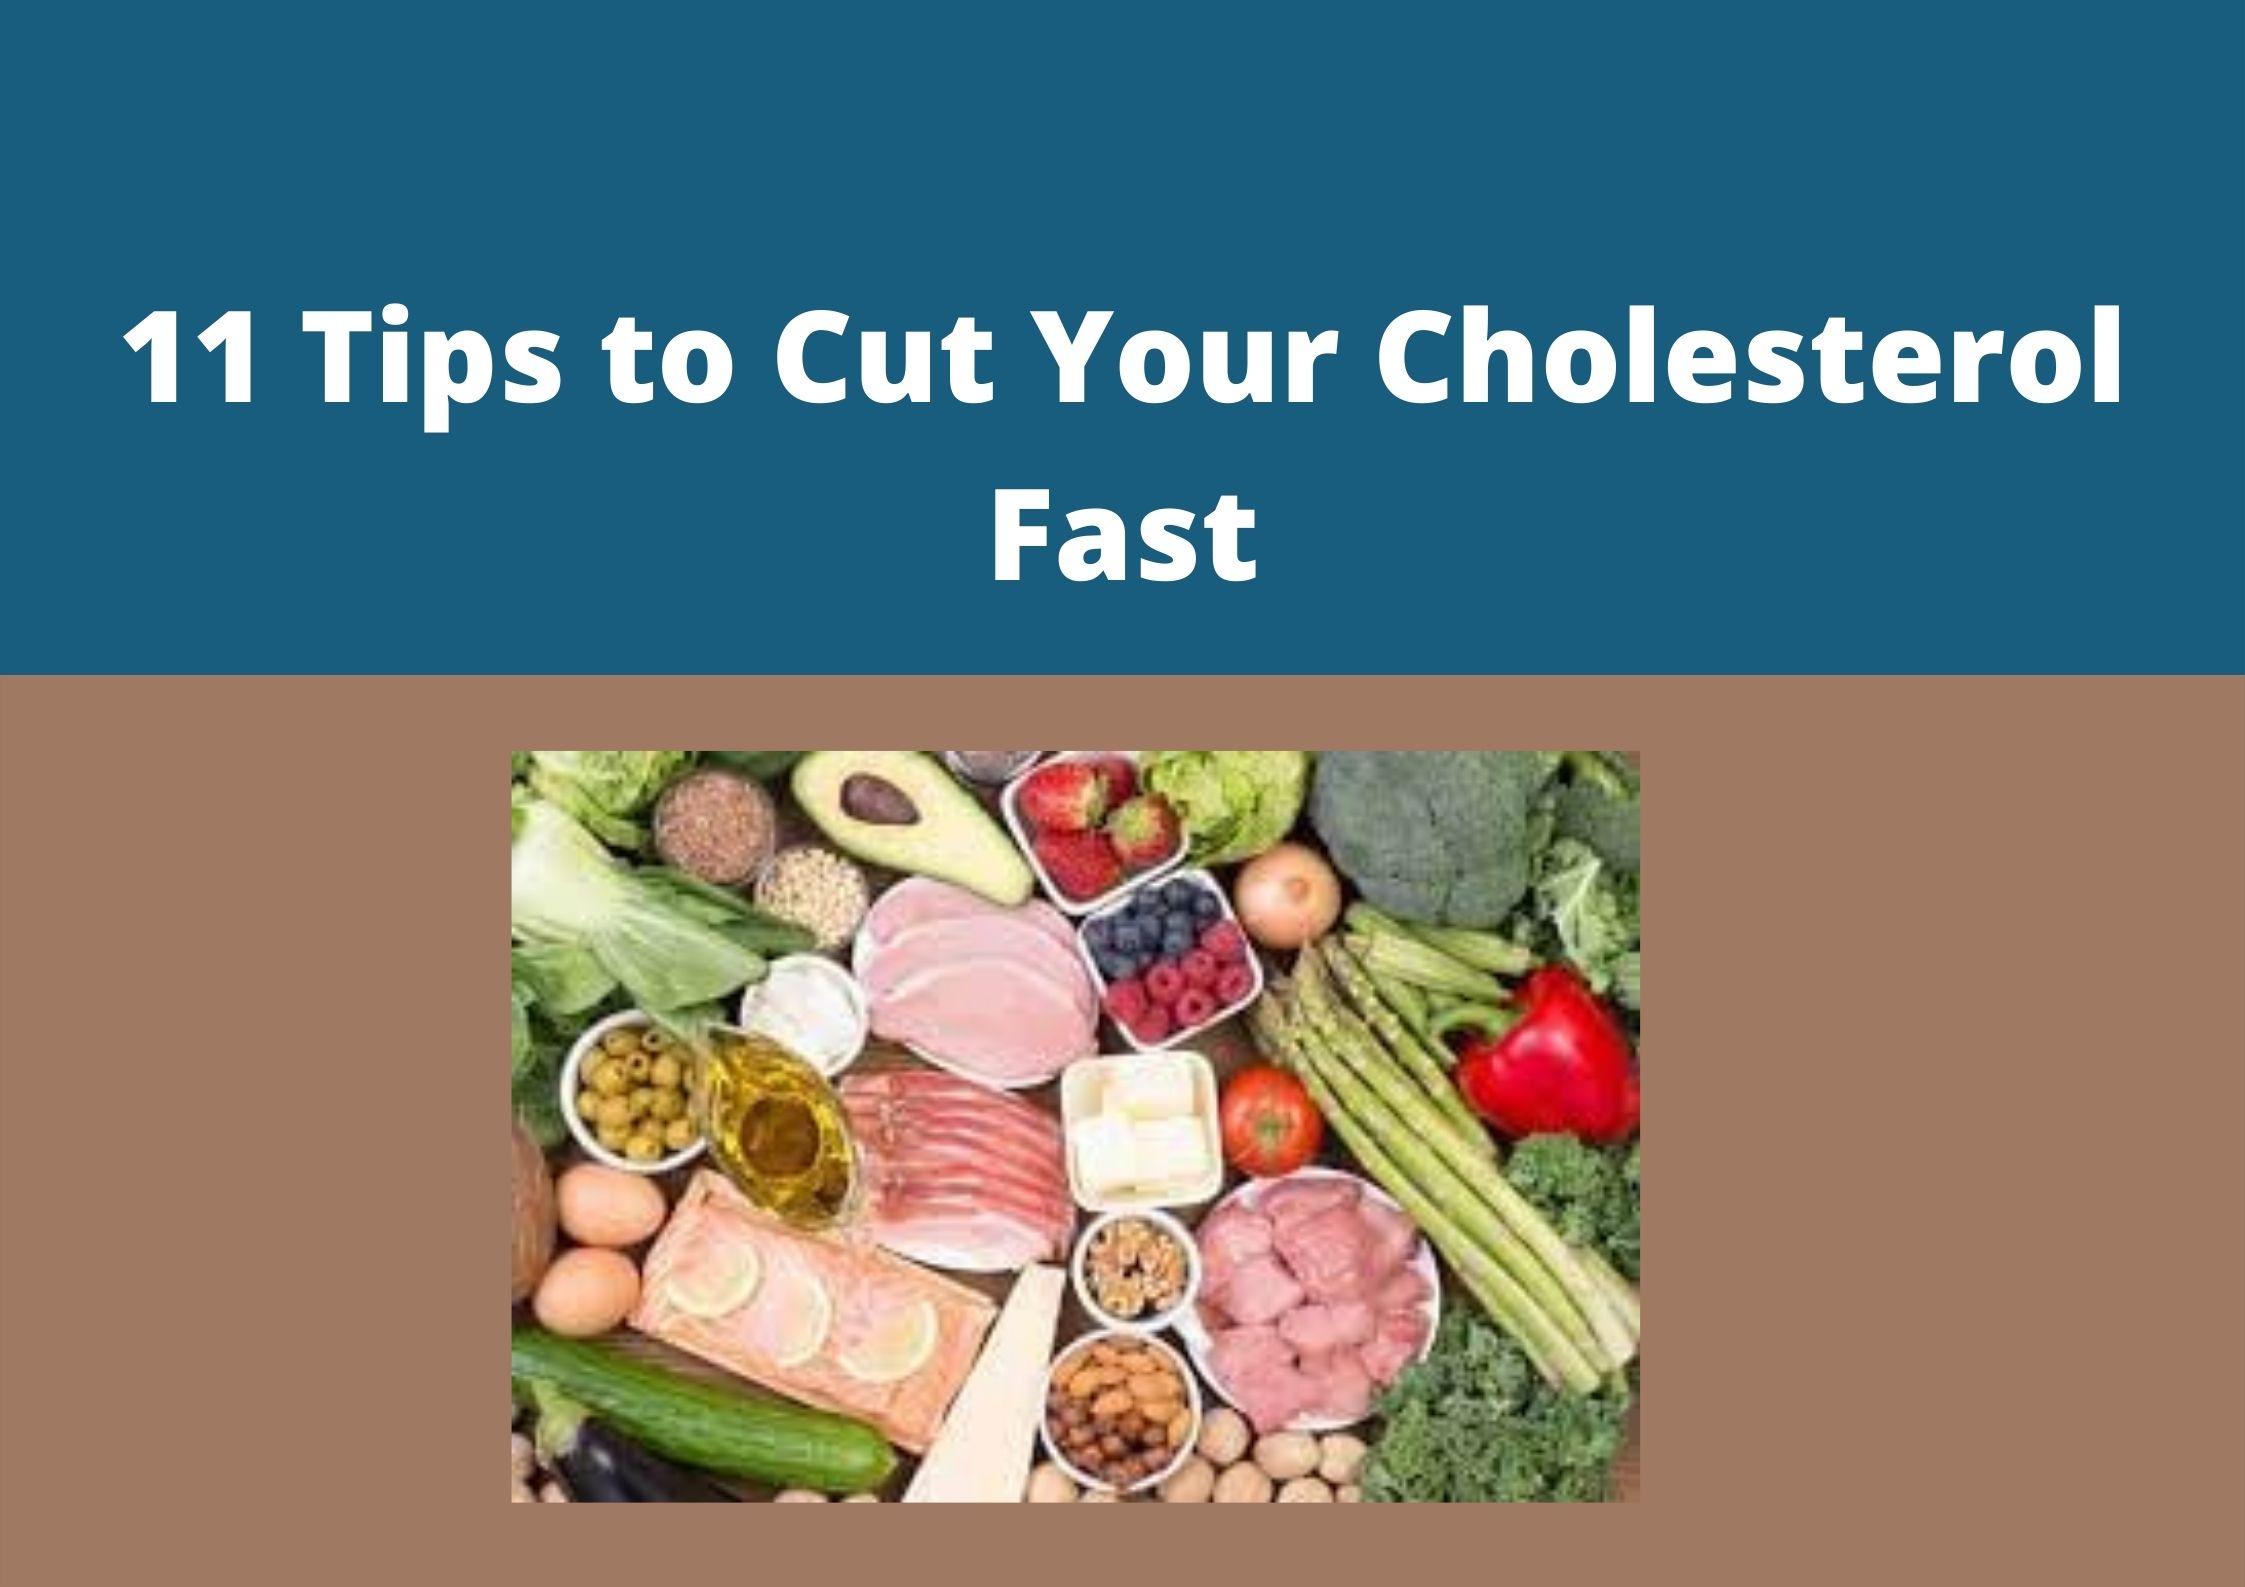 11 Tips to Cut Your Cholesterol Fast